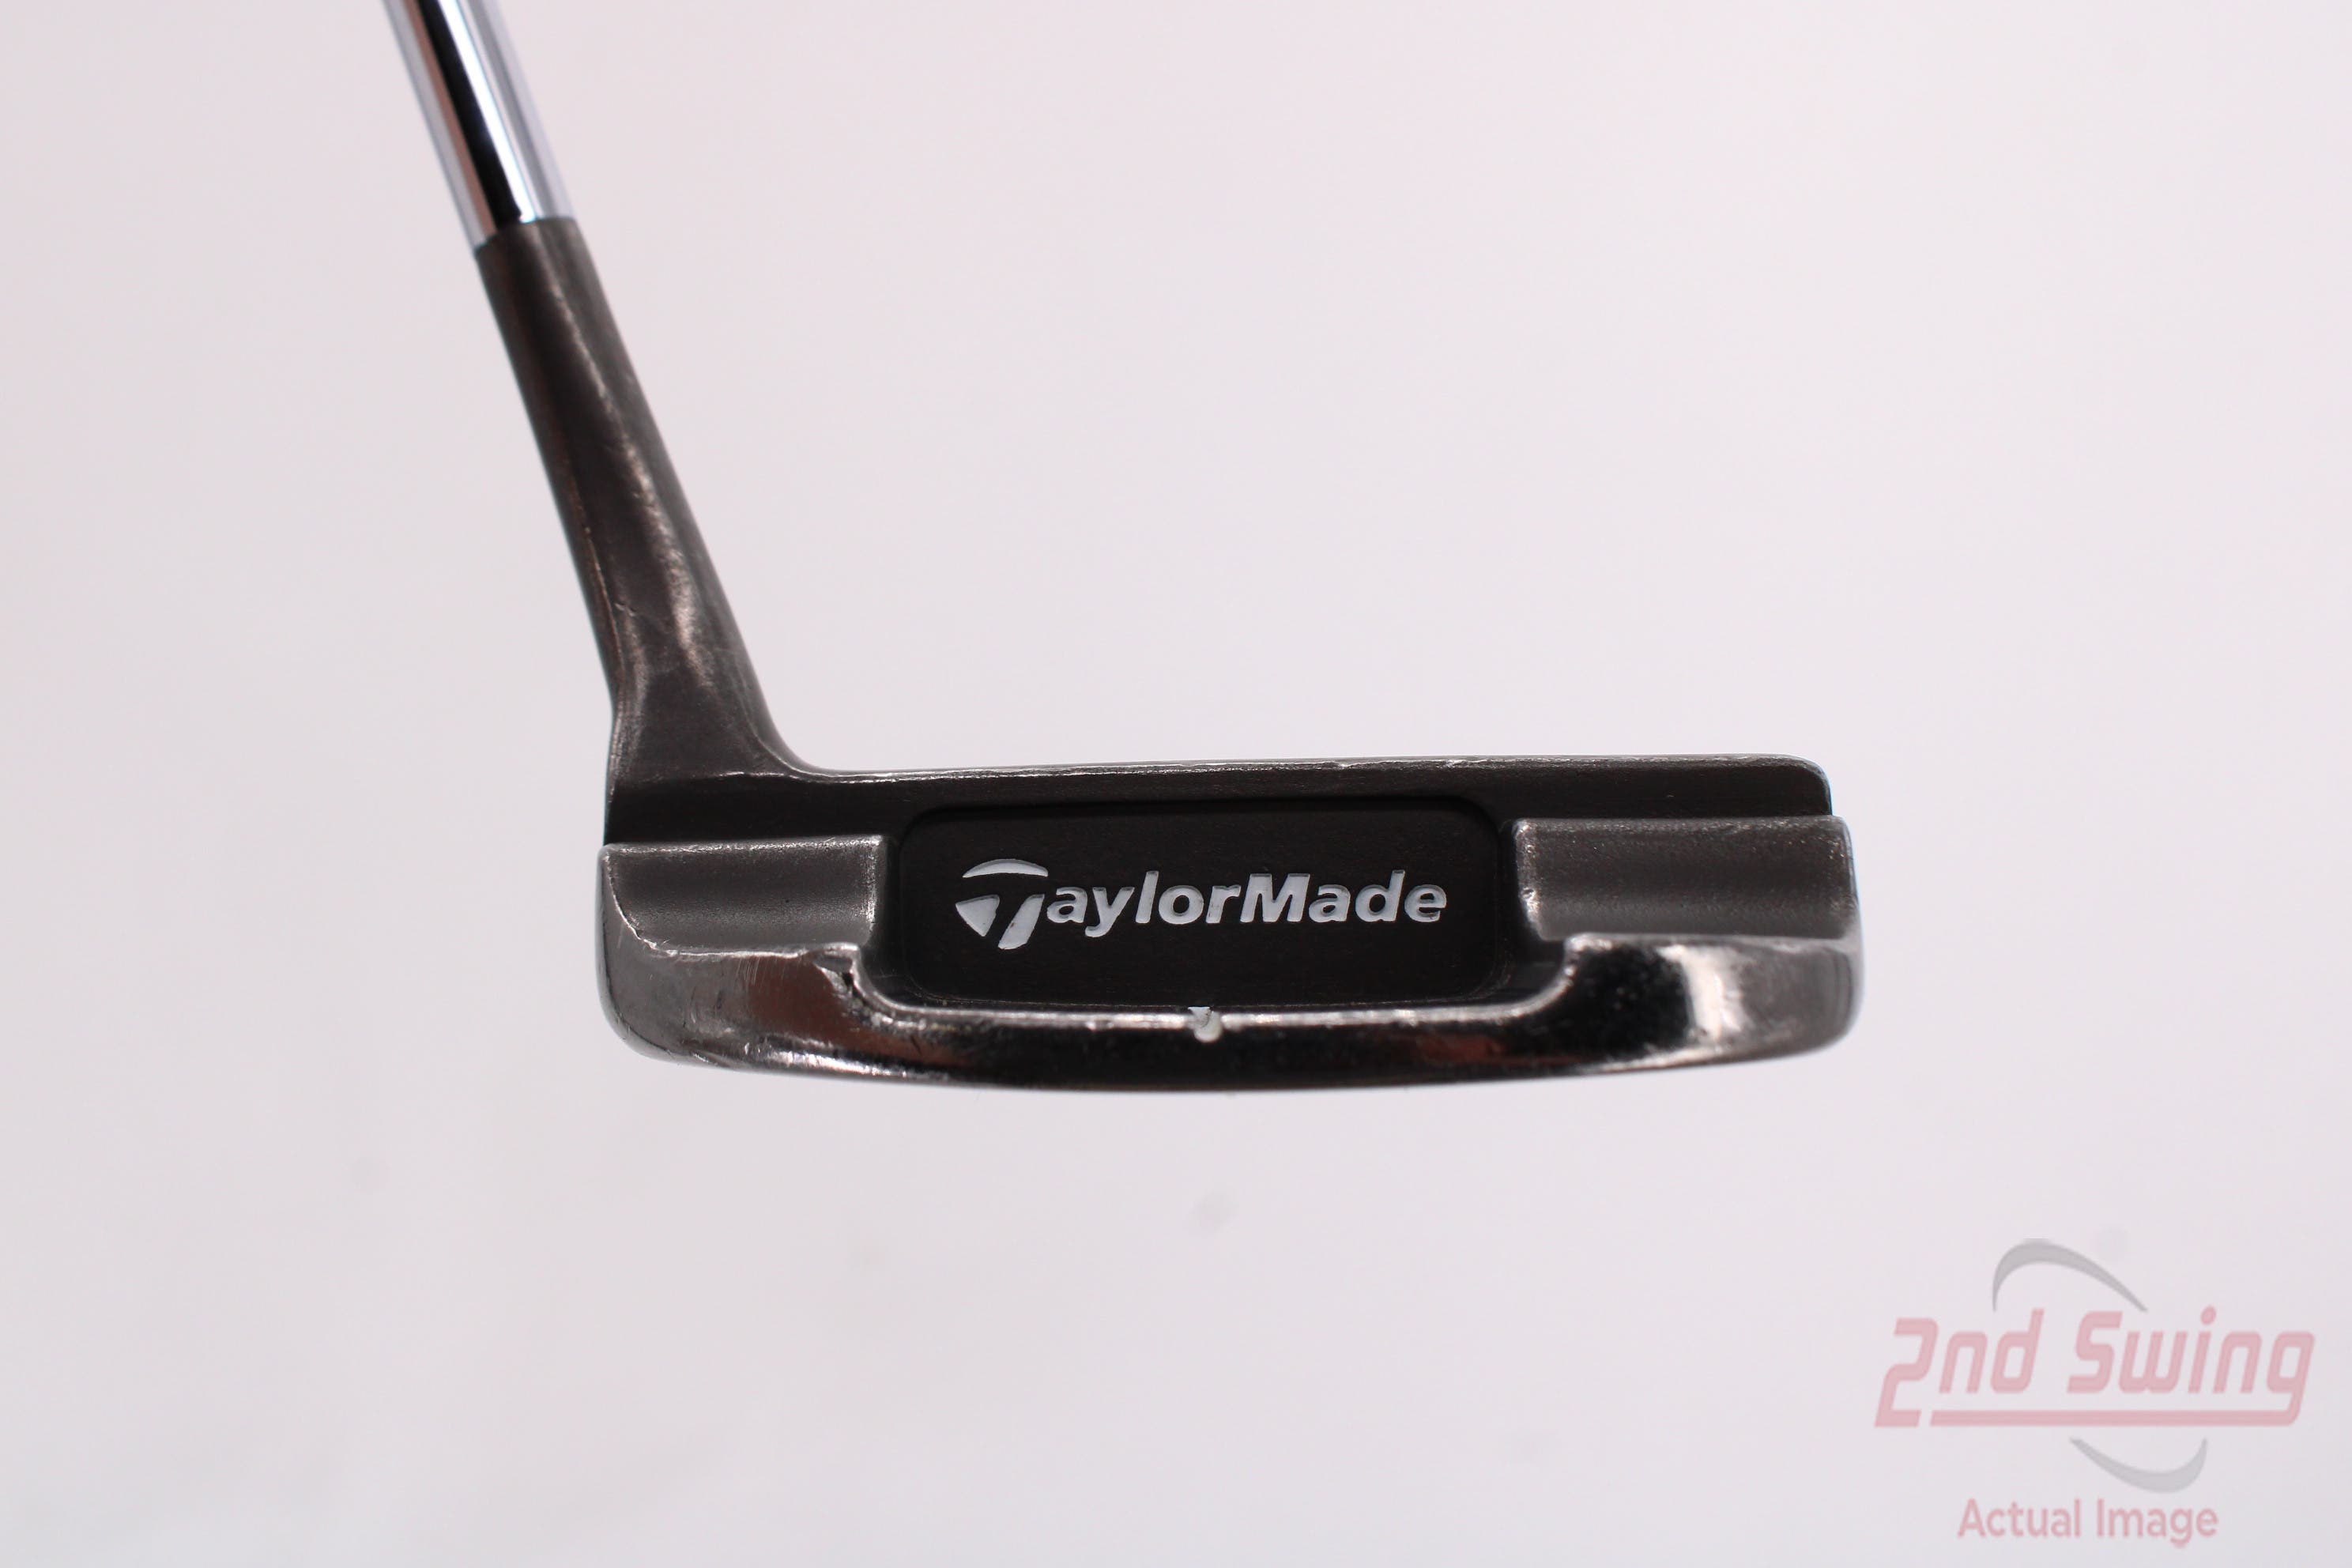 TaylorMade Ghost Tour Black Maranello Putter (M-42330752175)